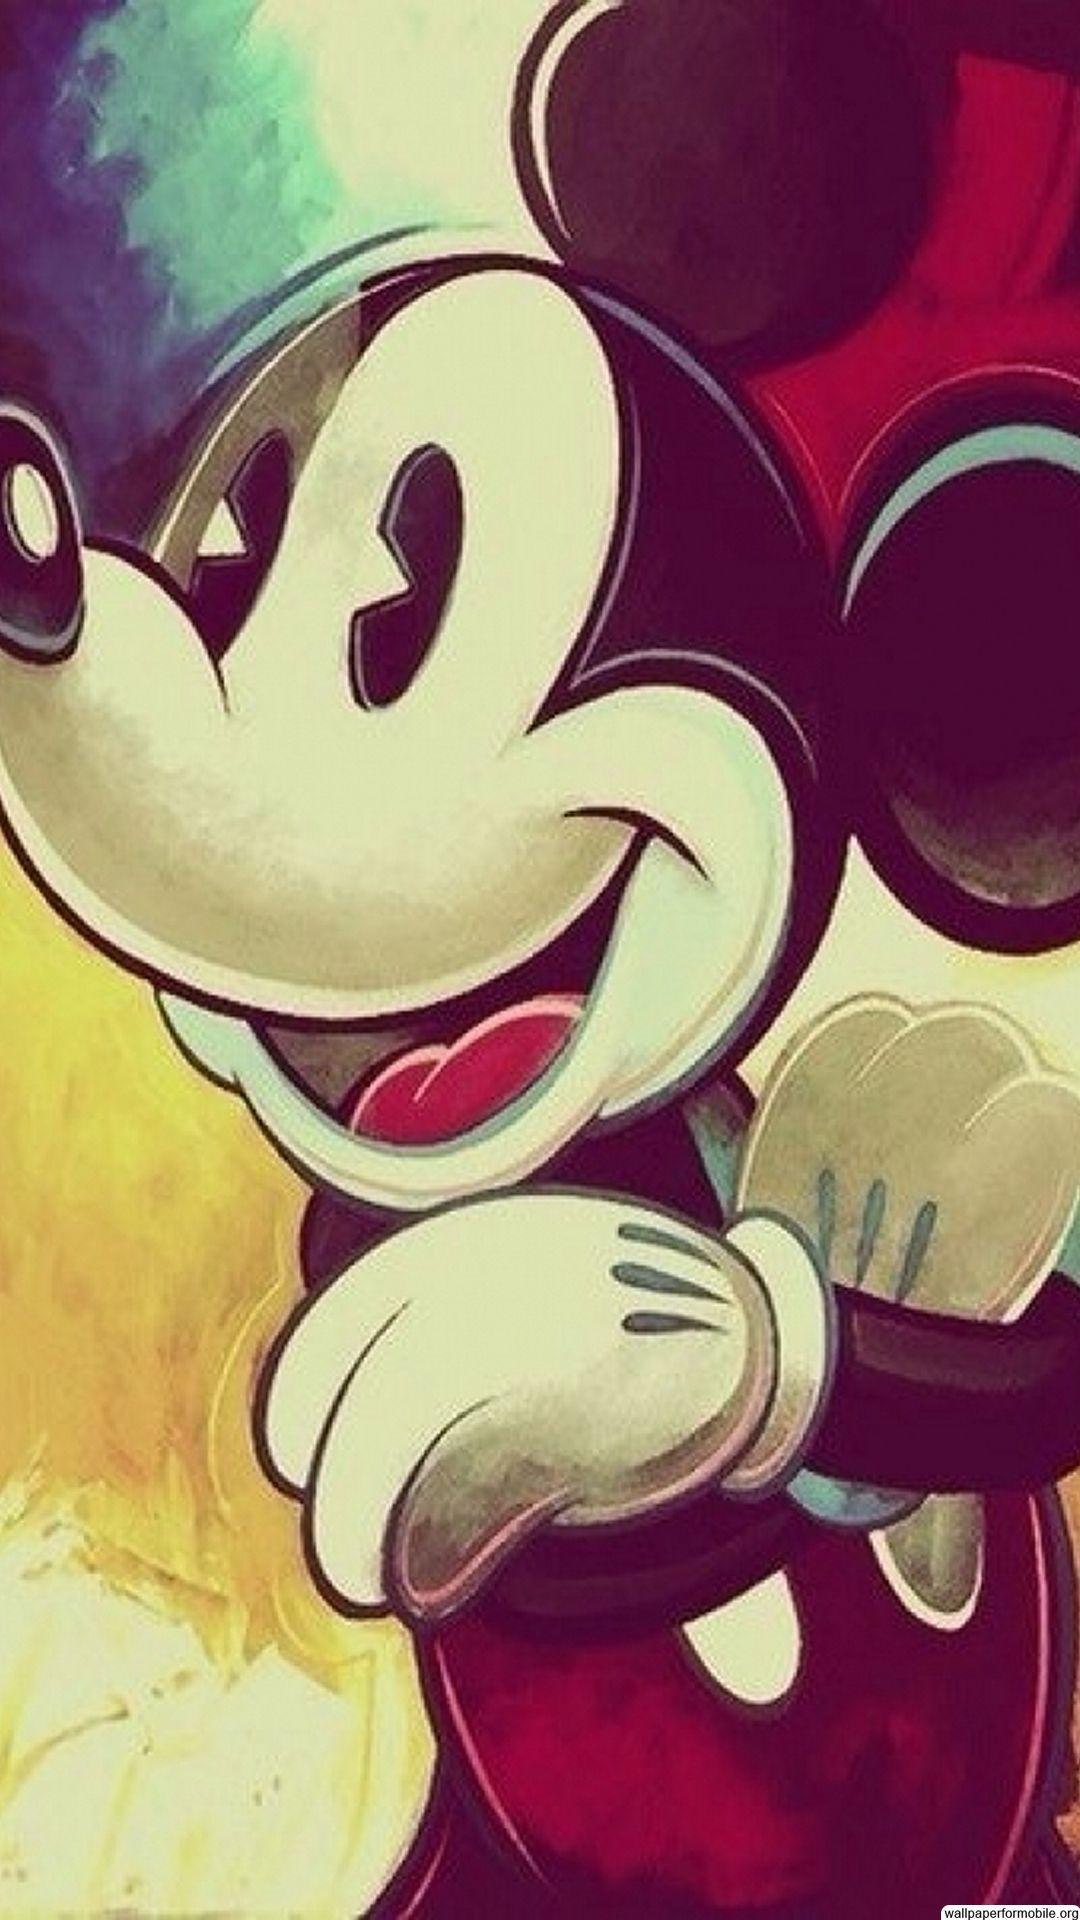 Mickey Mouse Wallpaper For iPhone. Wallpaper for Mobile